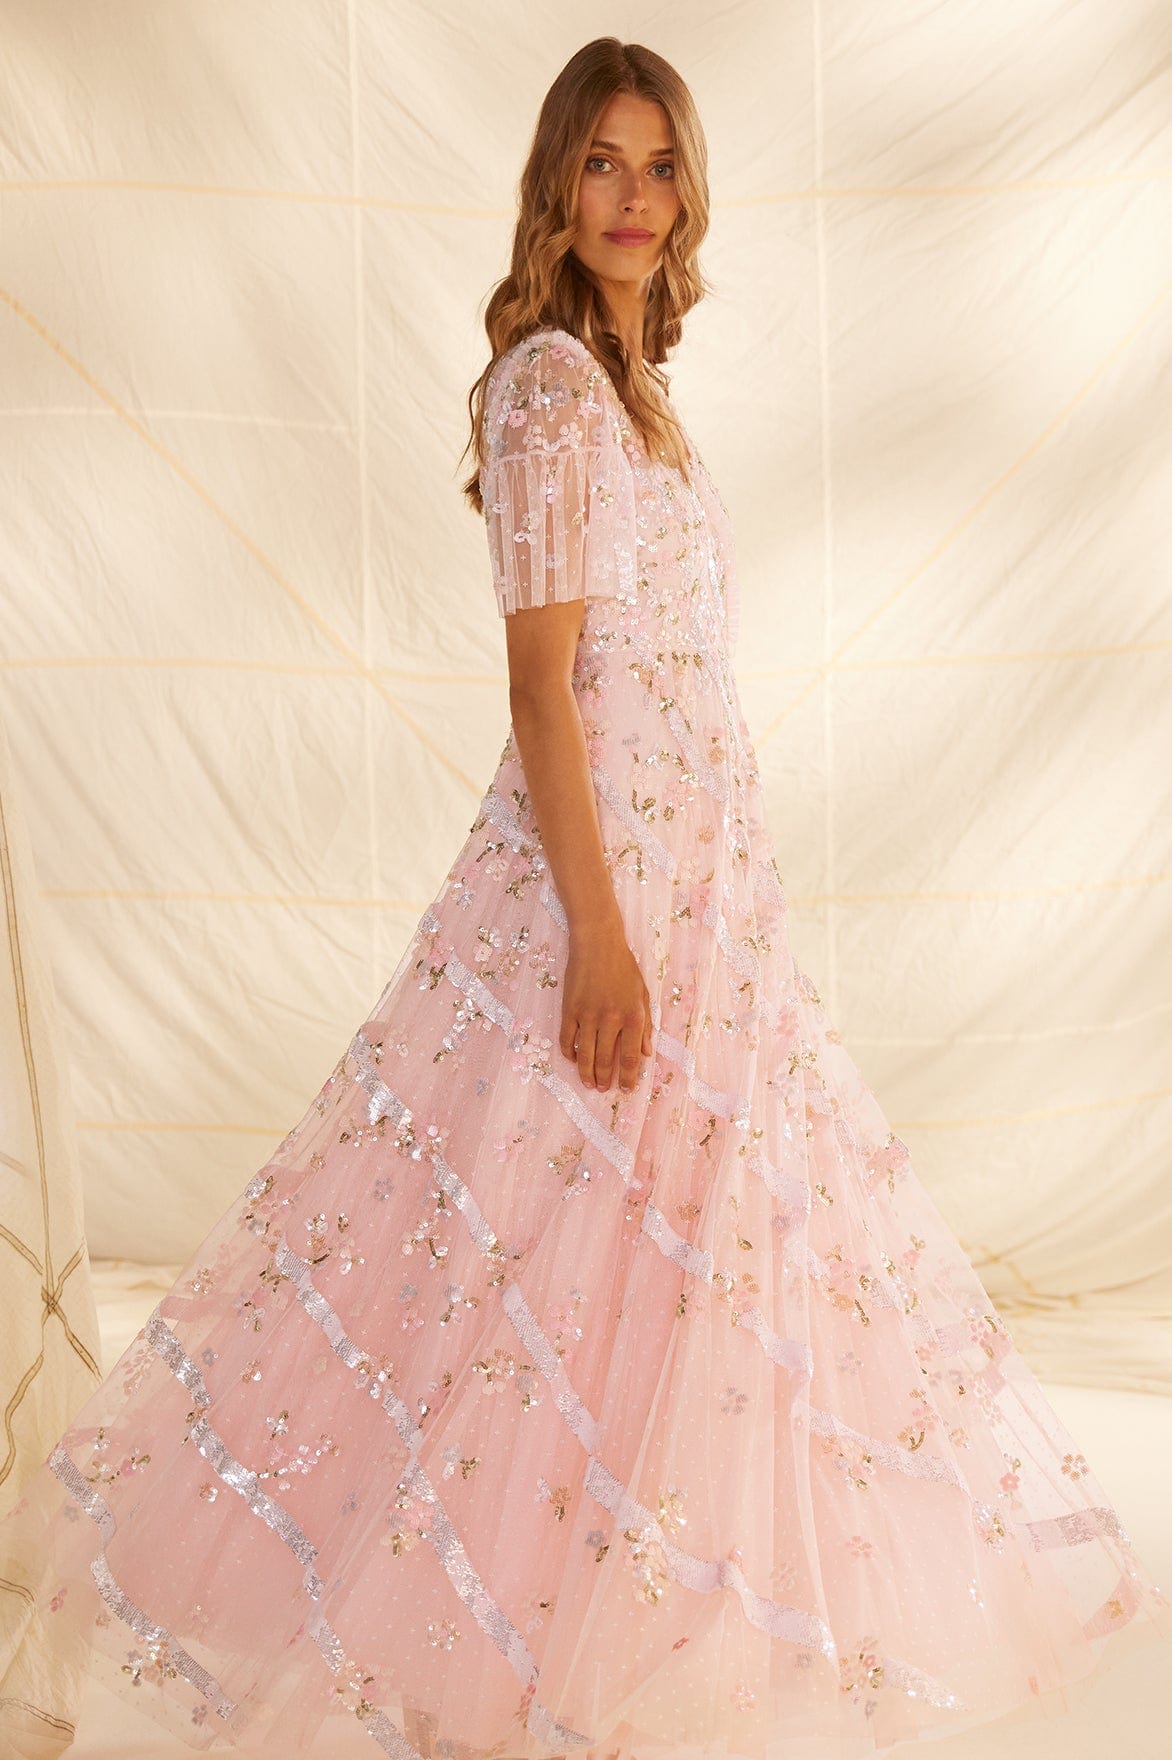 Needle and Thread Dresses and Accessories Featuring Tulle and Sequins